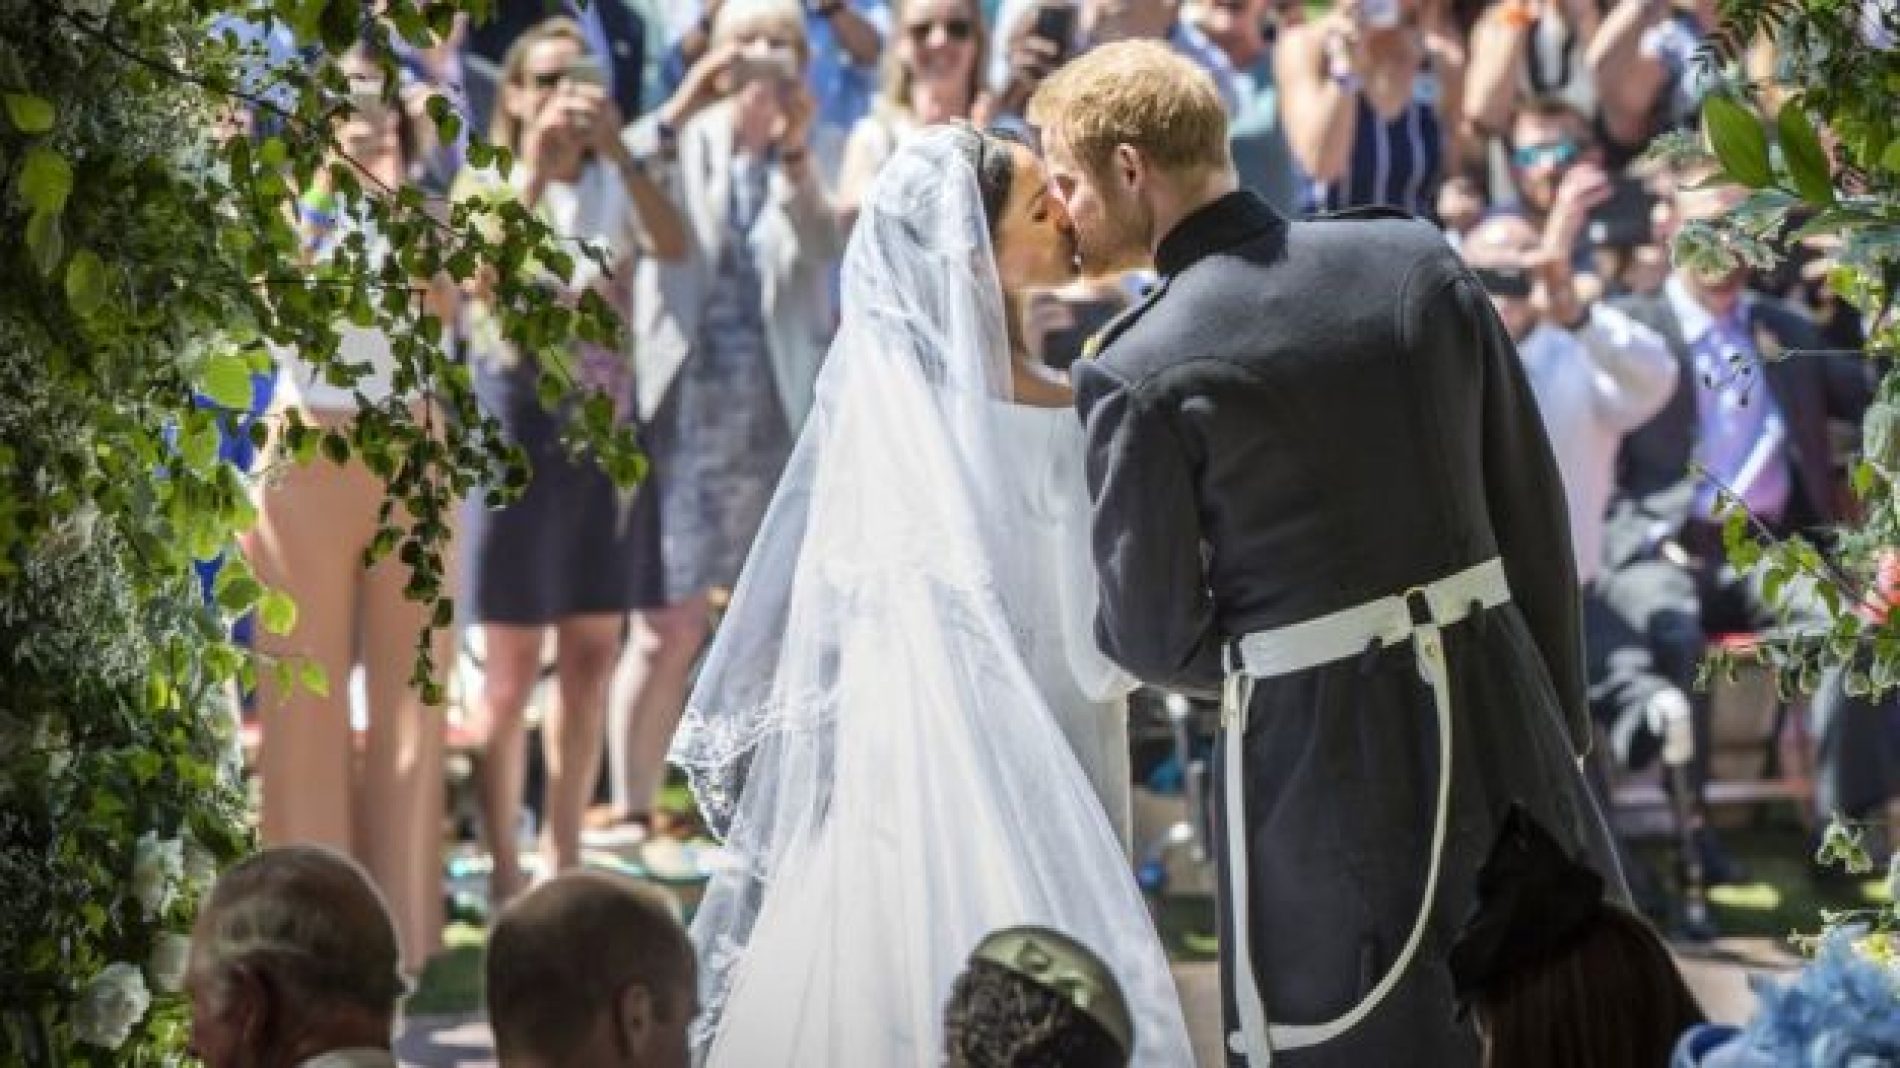 Prince Harry and Meghan Markle Are Married